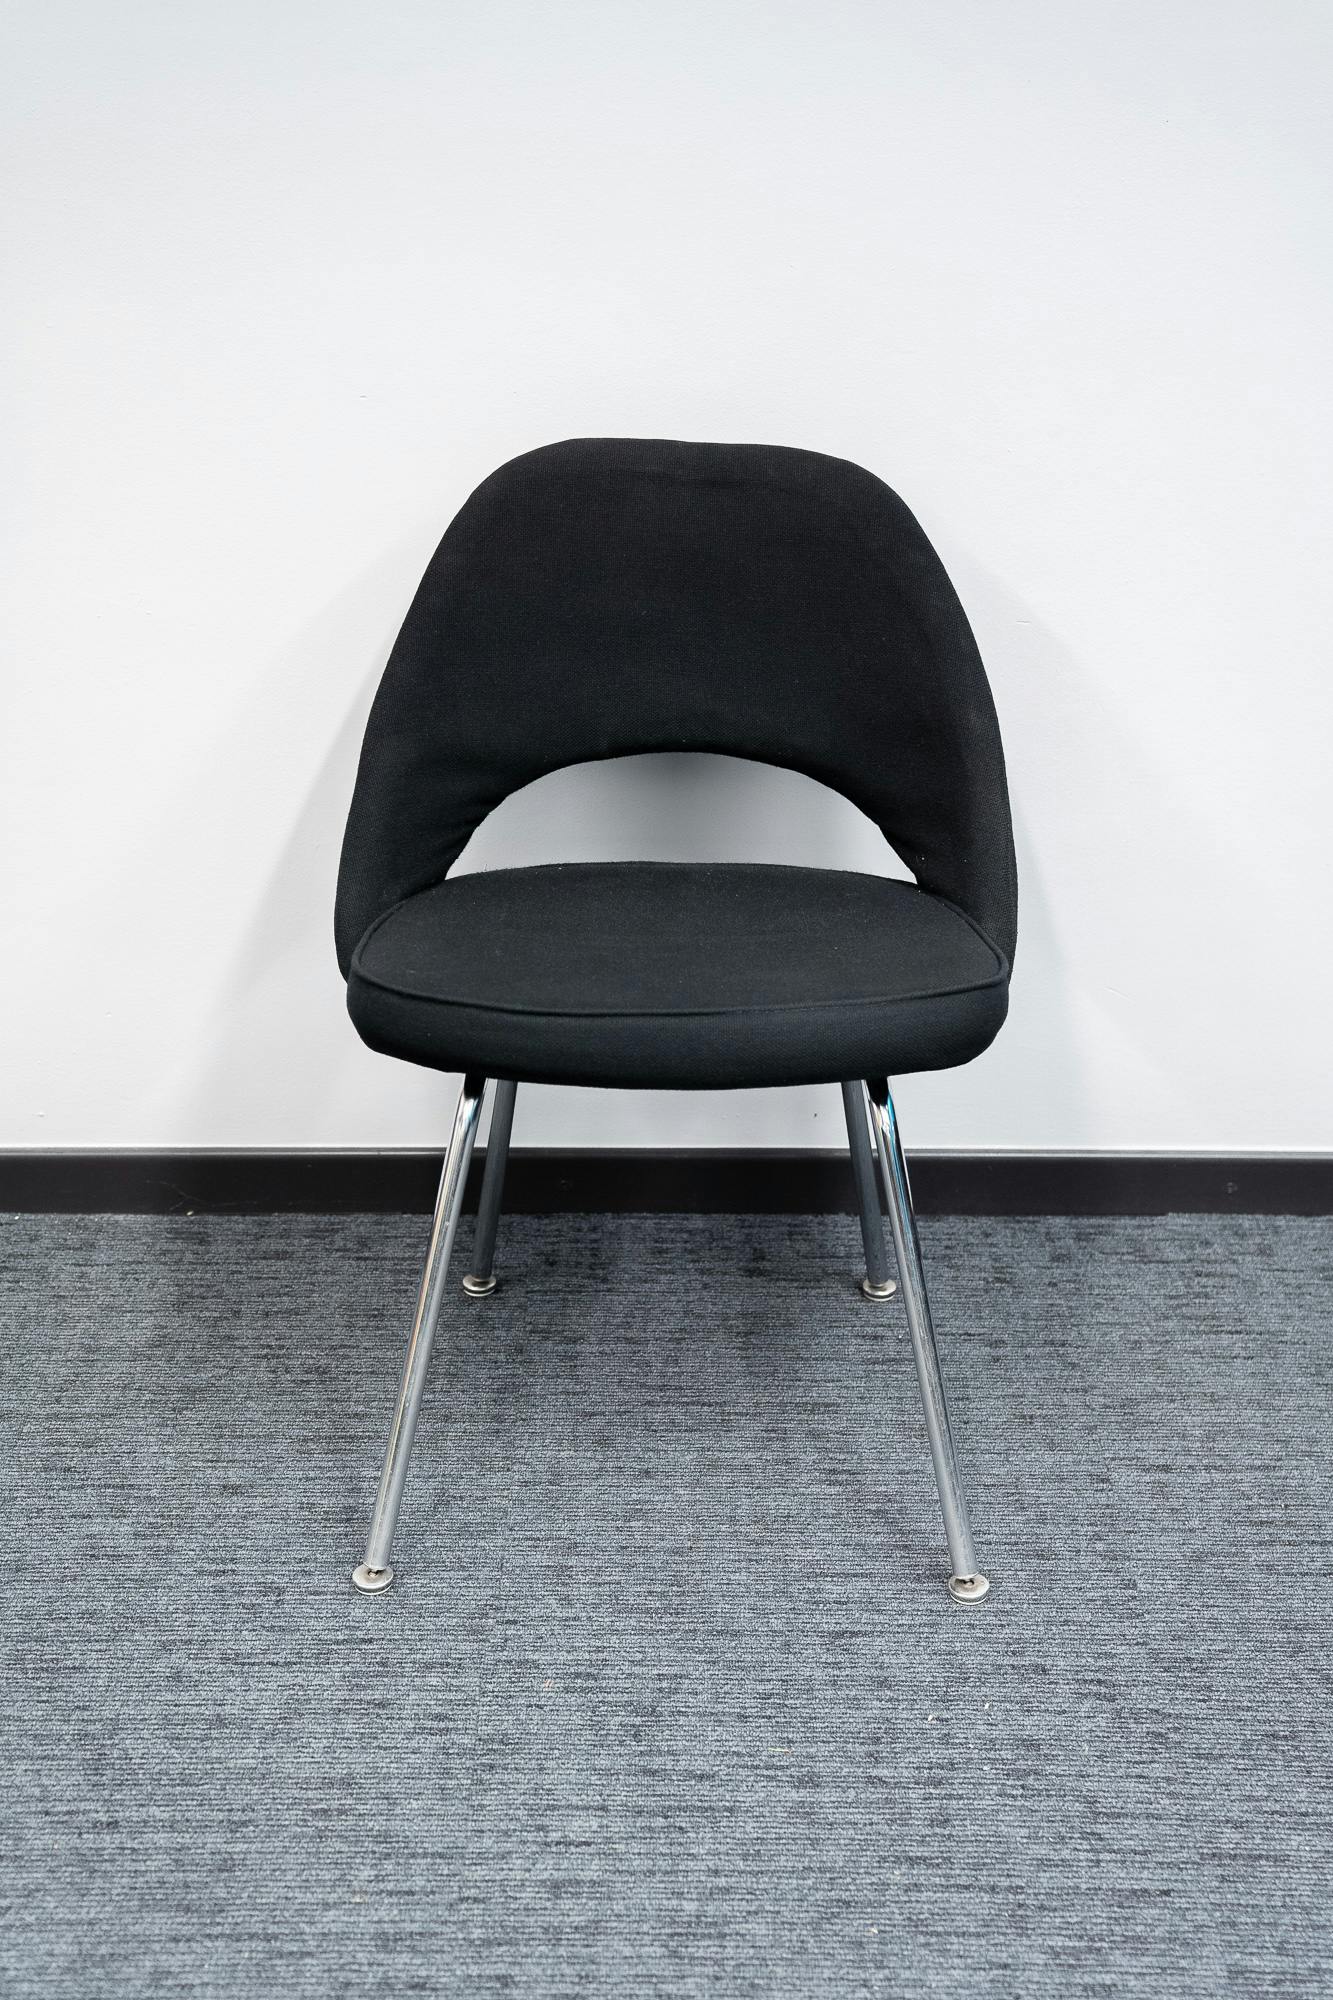 Black fabric chair with aluminum legs - Relieve Furniture